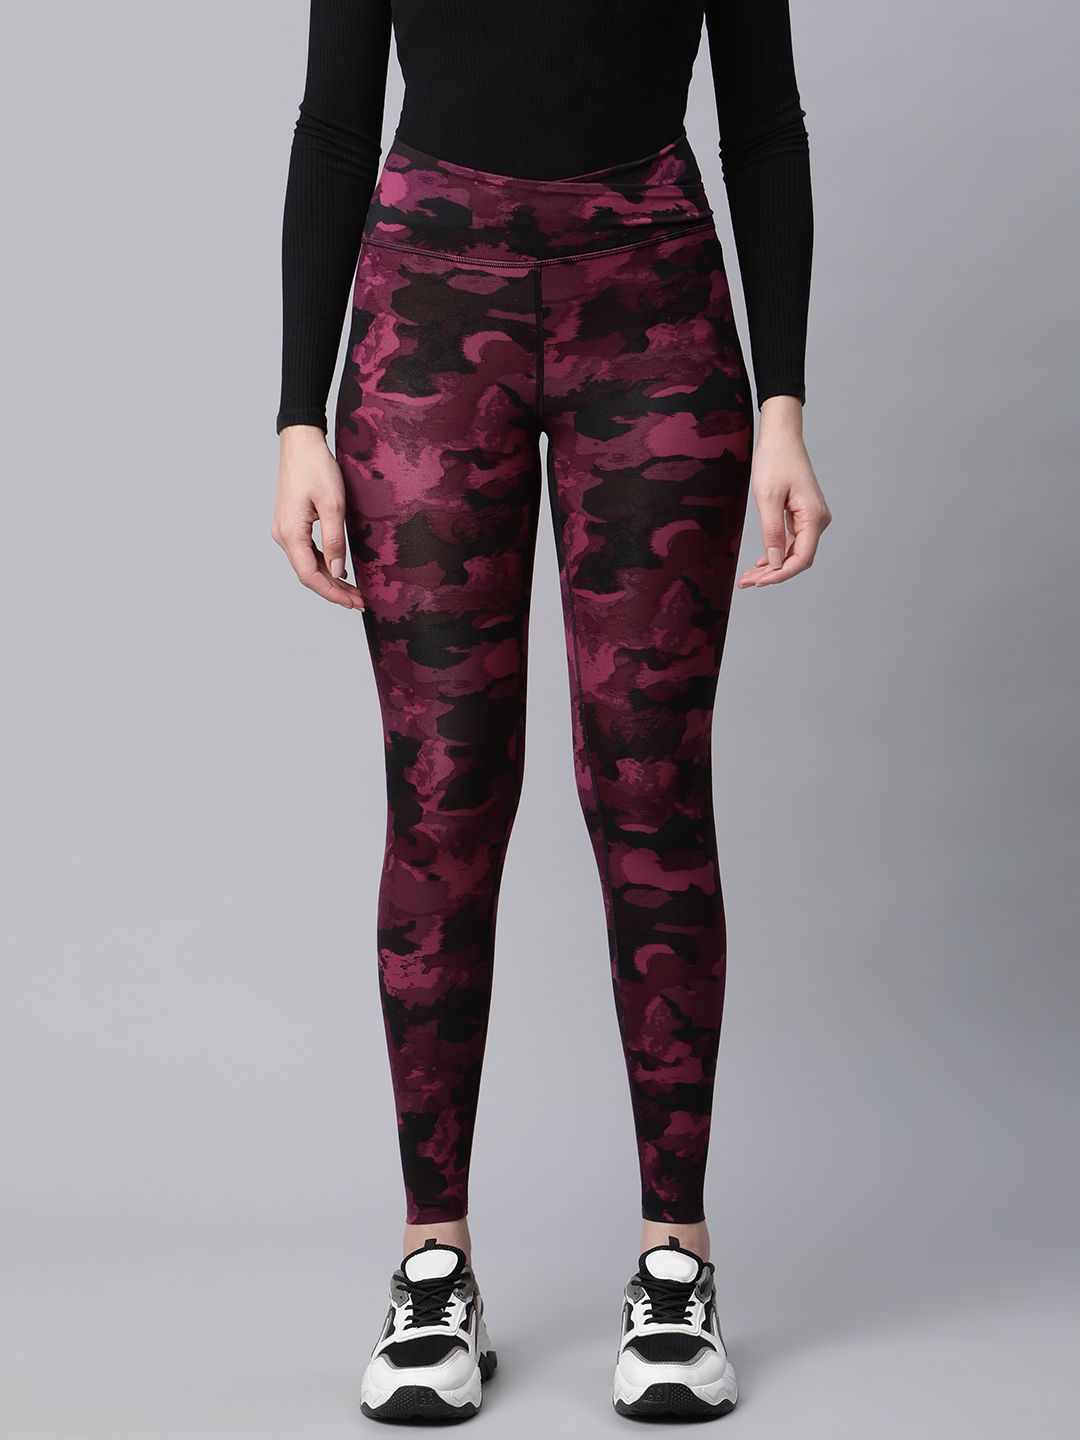 Marks & Spencer Women Black & Pink Printed Tights Price in India